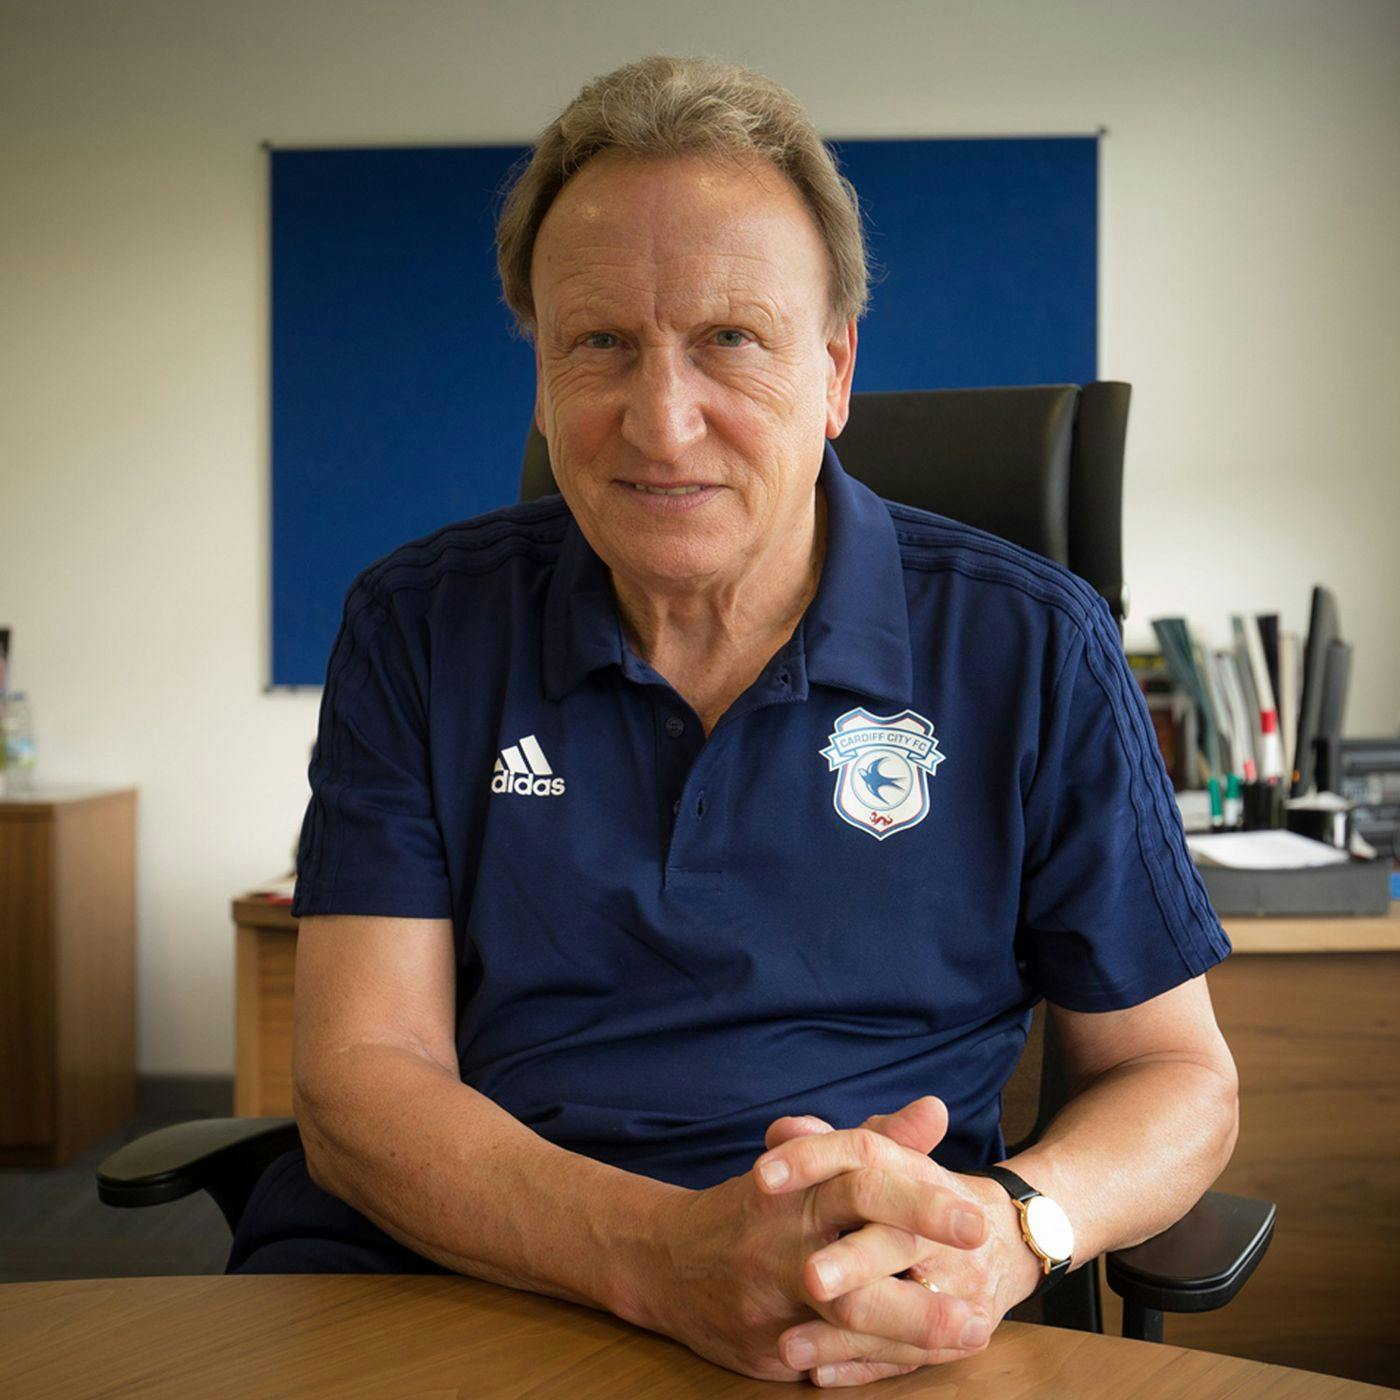 Bootroom special: Our Neil Warnock interview